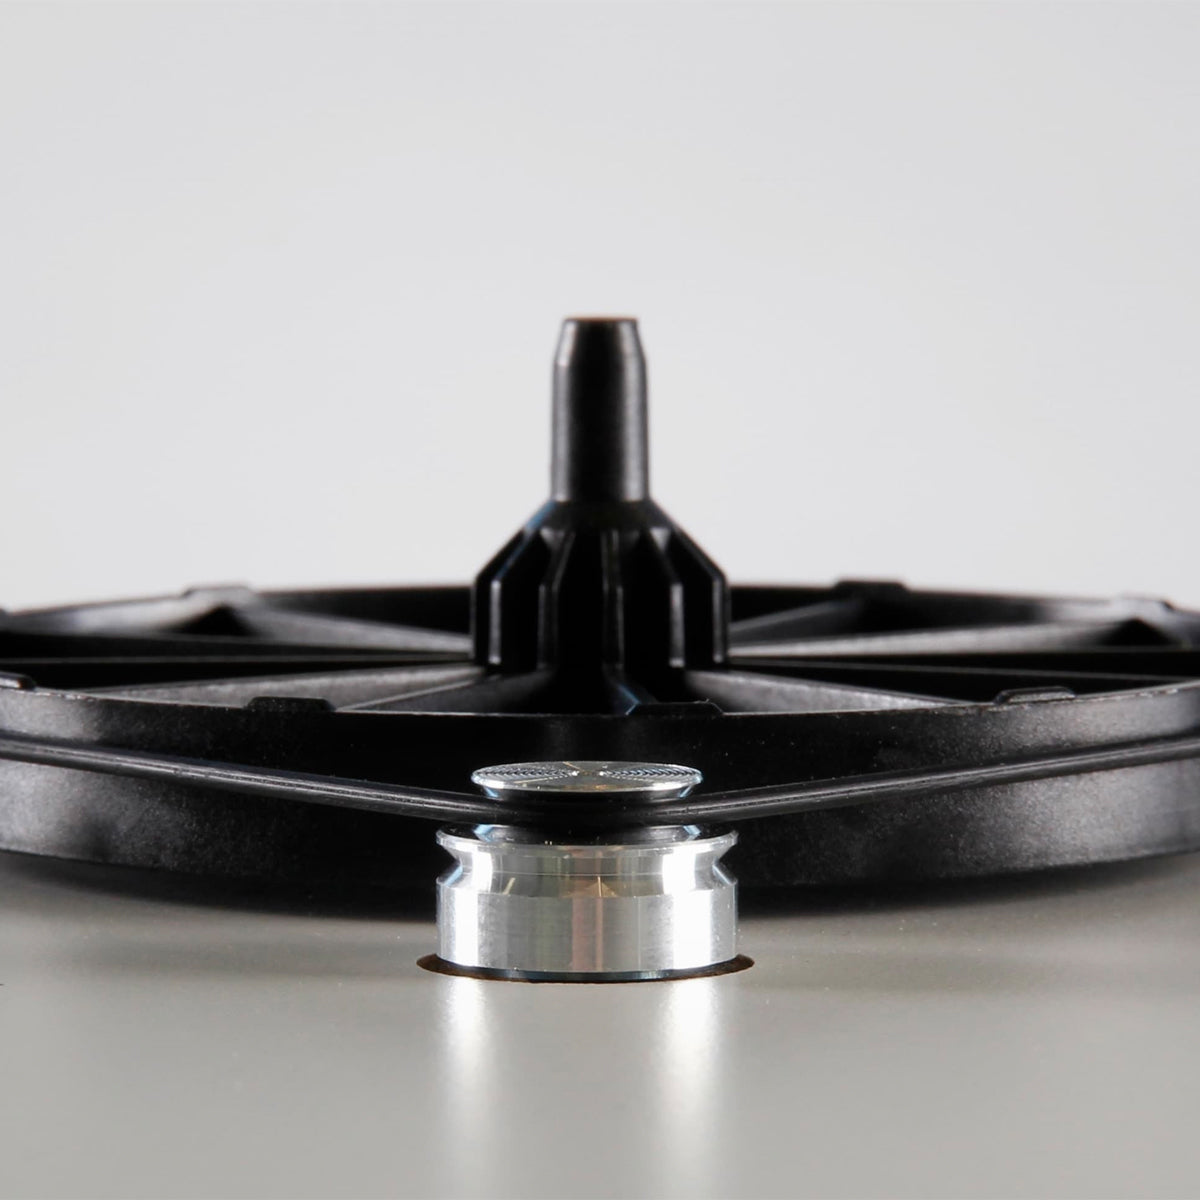 Rega Planar 1 PLUS Turntables with Phono Stage - Black - The Audio Experts